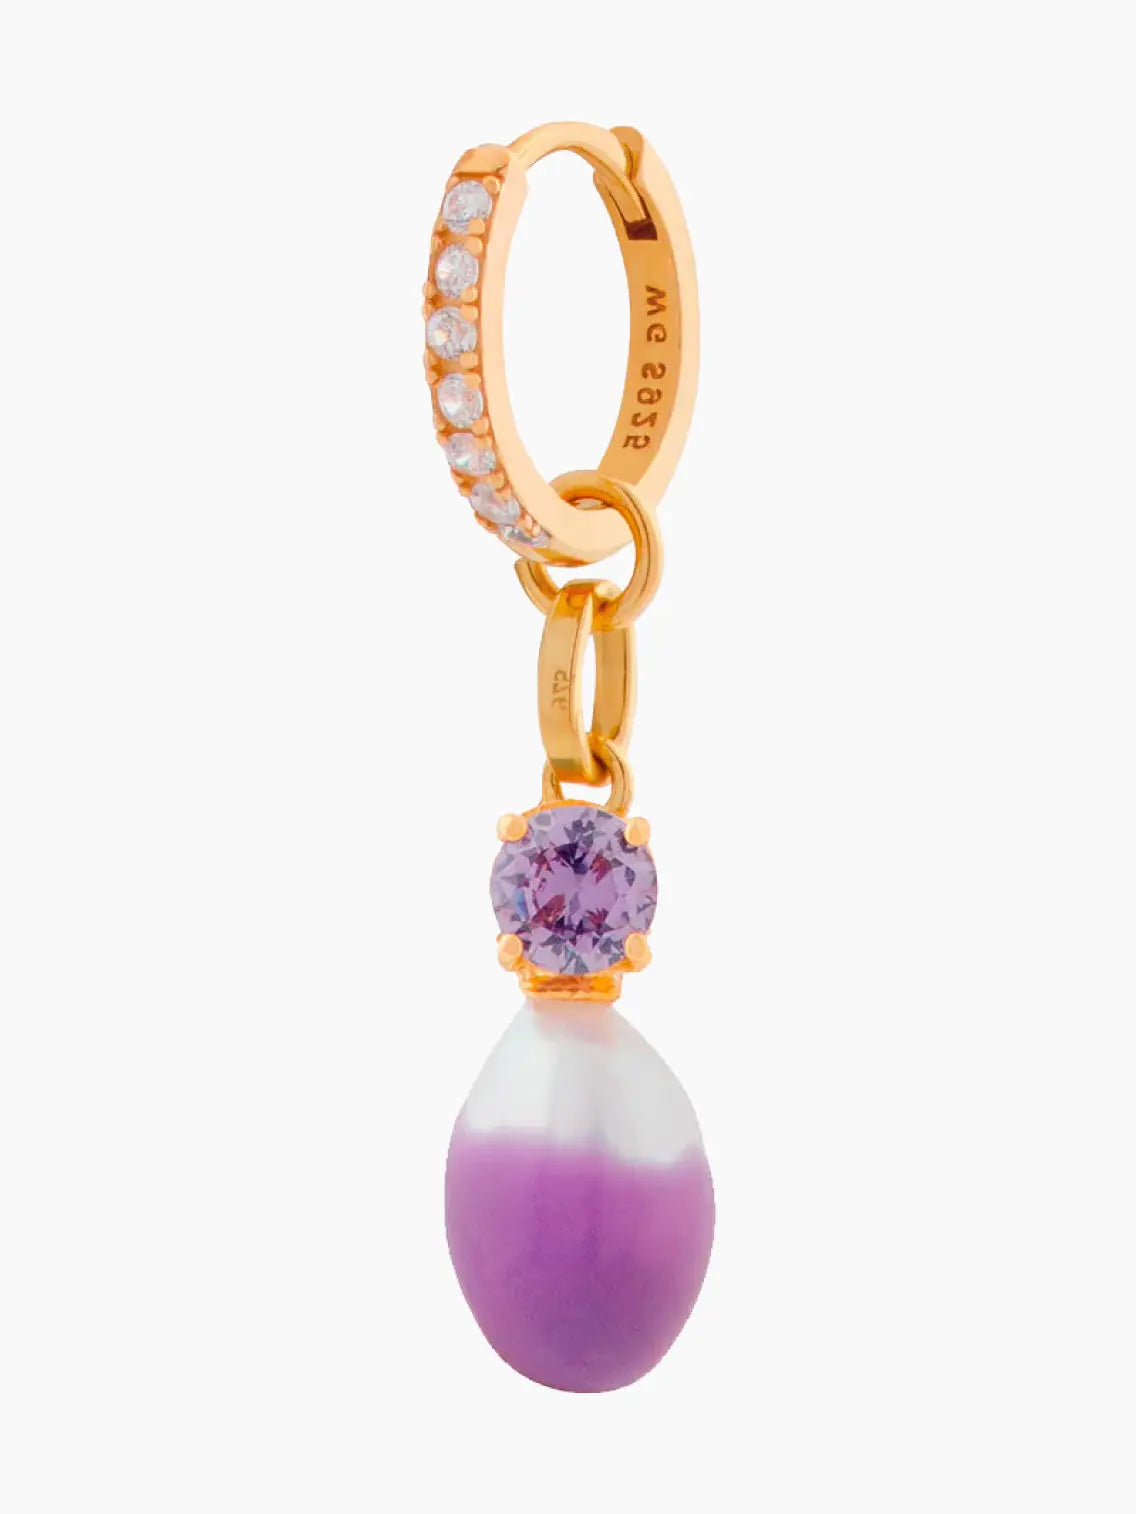 A single gold earring adorned with small diamonds along the hoop. The Grape Swan Lake Pearl Hoop Earring by Wilhelmina Garcia, available at Bassalstore in Barcelona, features a dangling purple gemstone above a purple and white bead.